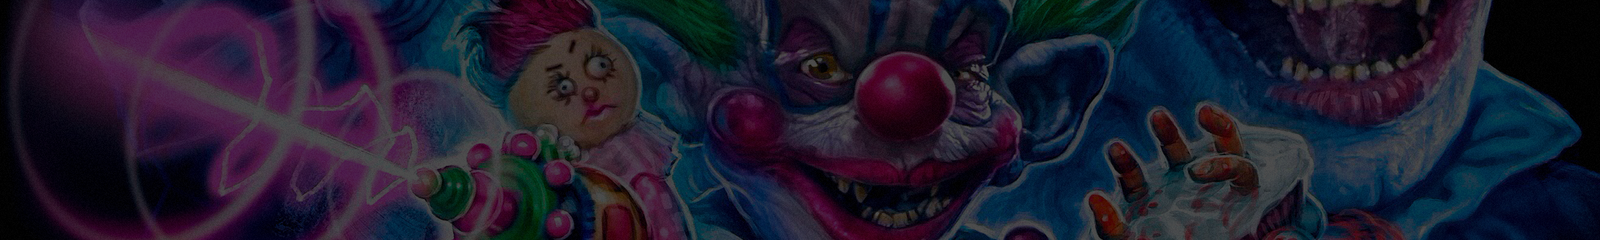 KILLER KLOWNS FROM OUTER SPACE new collection!